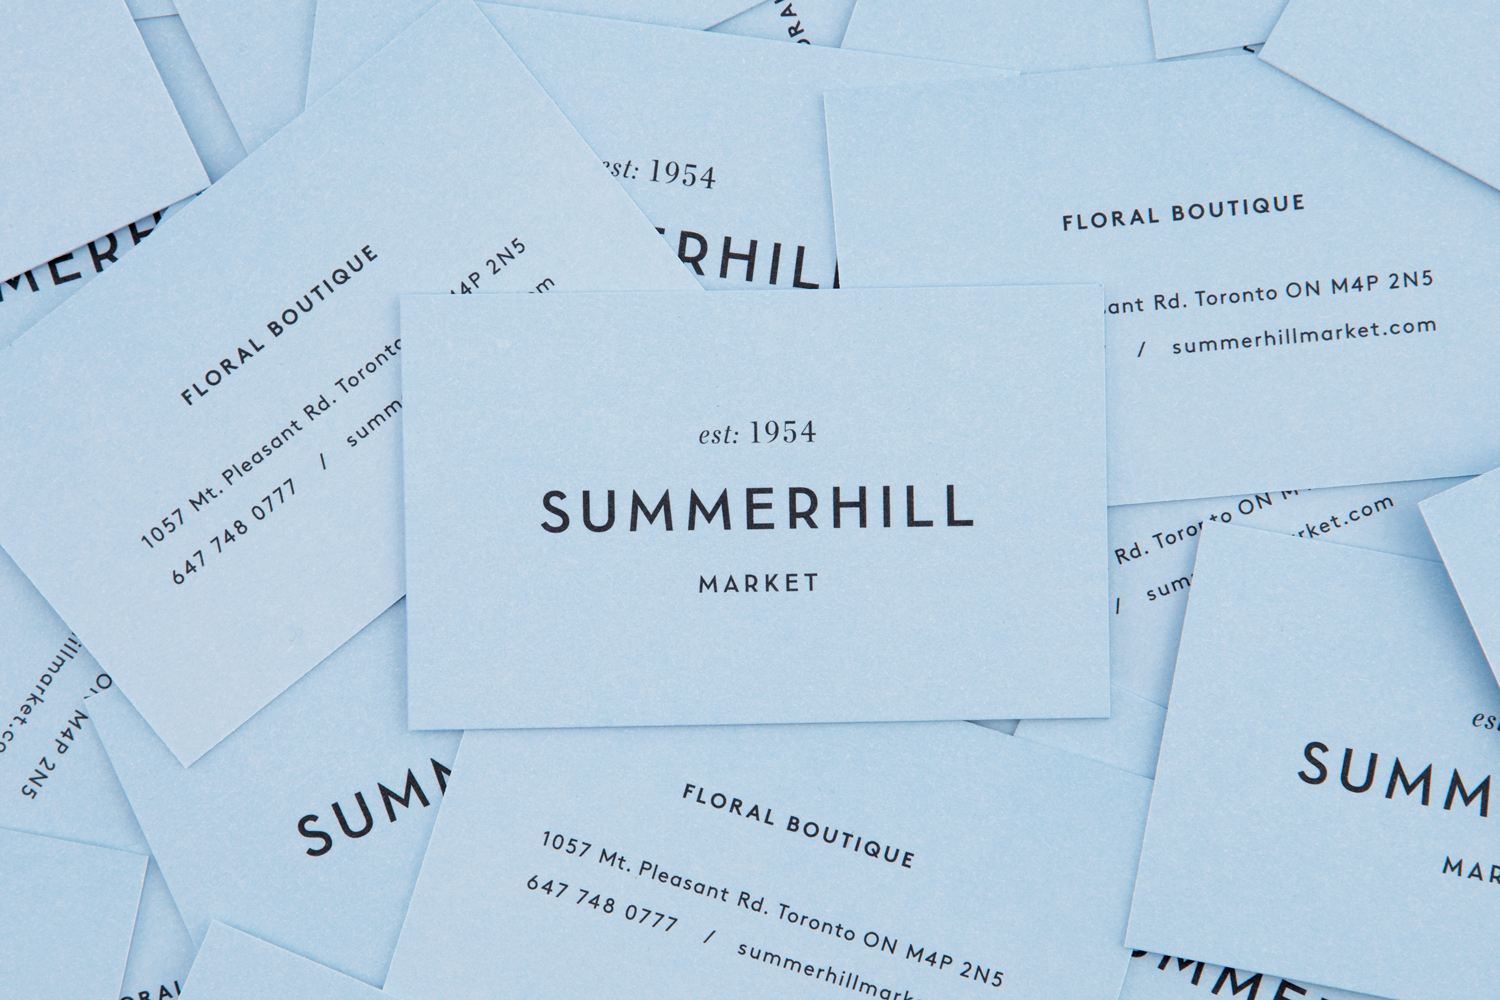 Brand identity and business cards designed by Canadian studio Blok for Toronto based boutique grocery store Summerhill Market